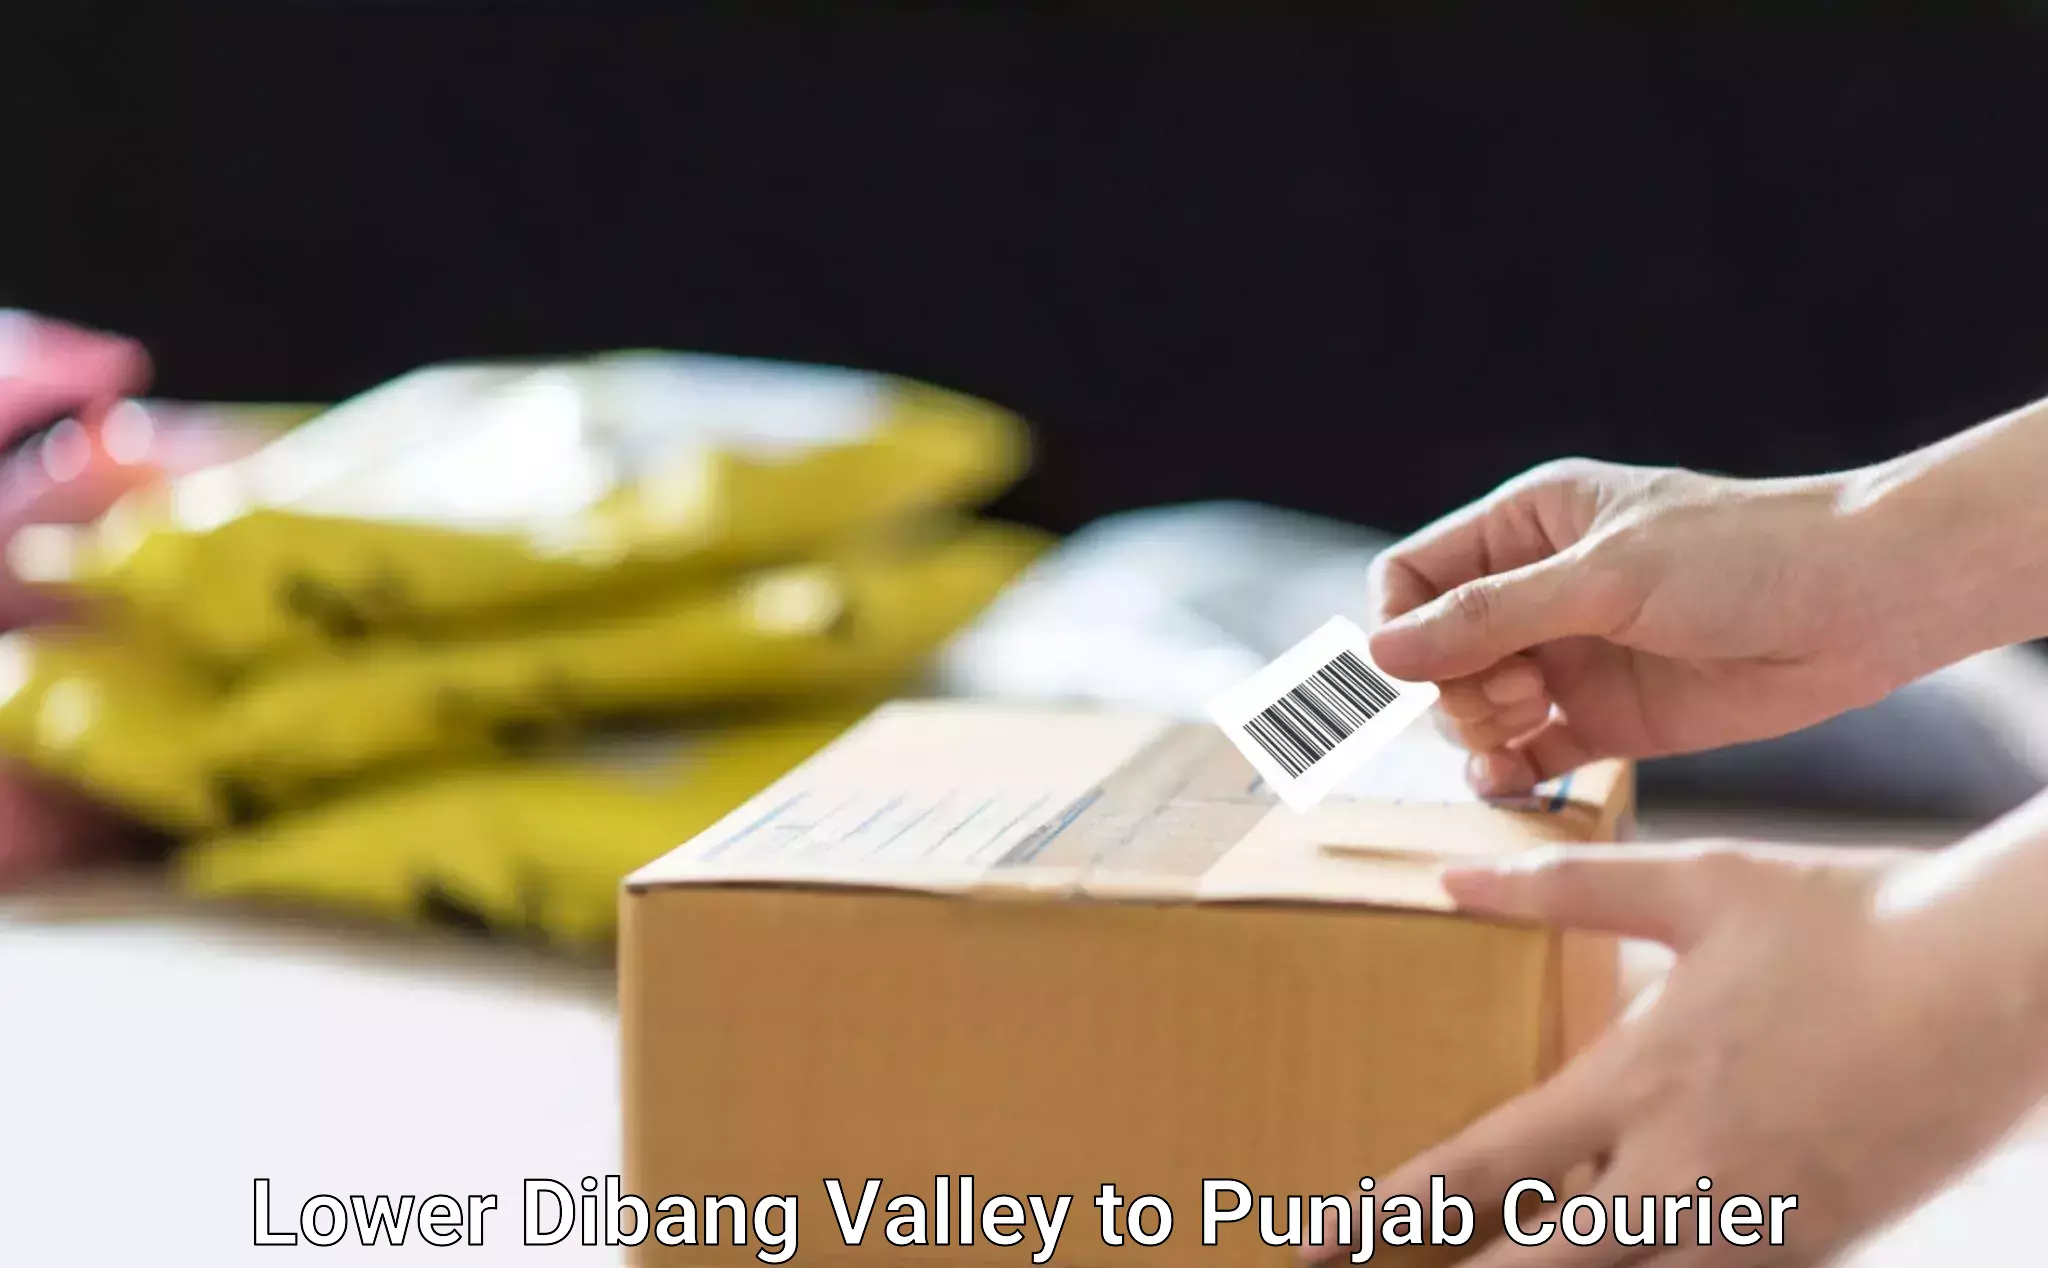 Speedy delivery service Lower Dibang Valley to Amritsar